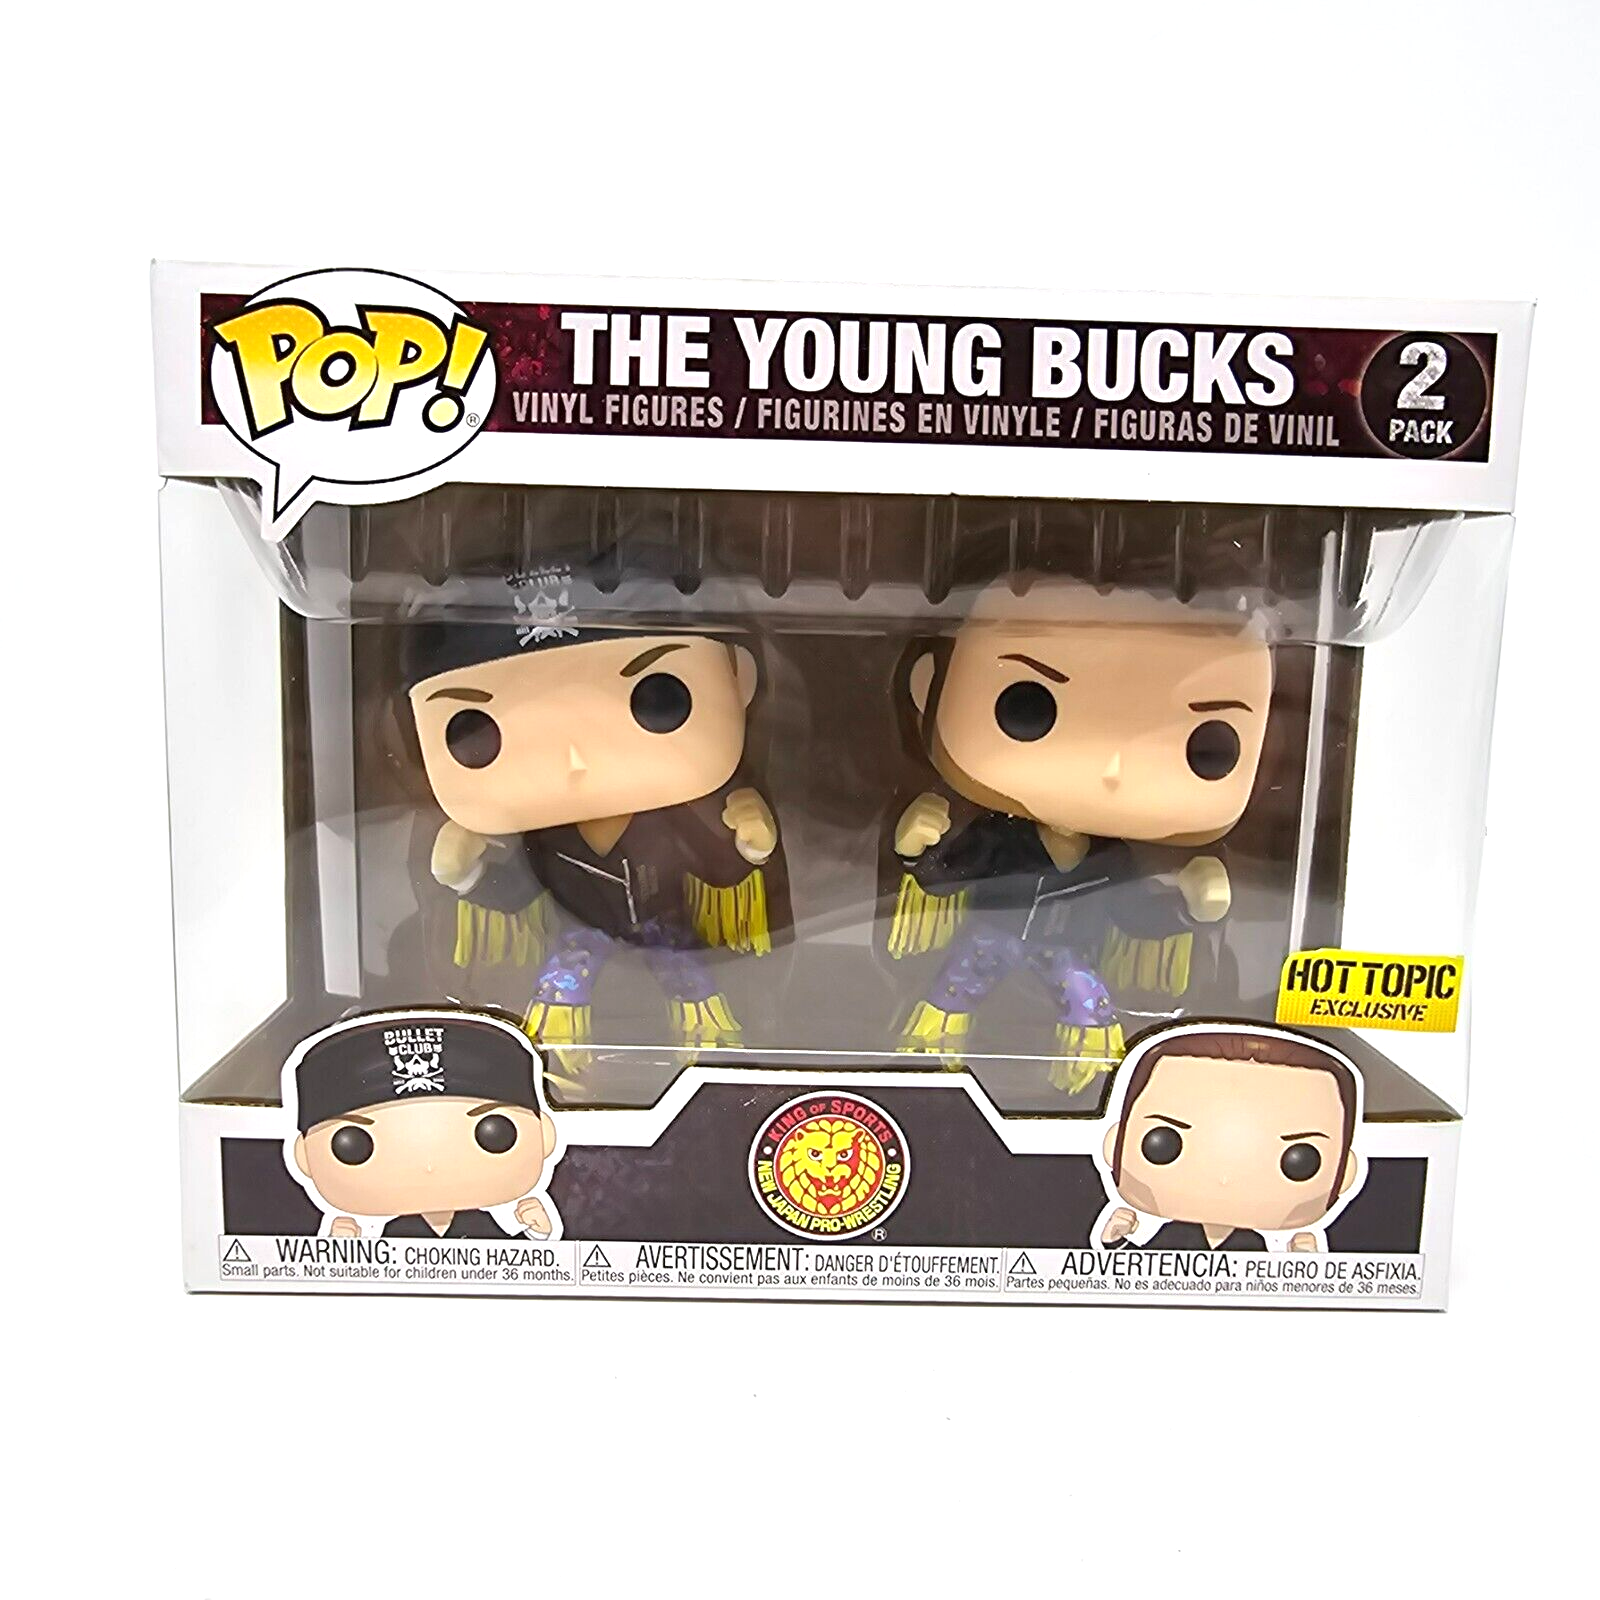 Primary image for Funko Pop King of Sports The Young Bucks 2 Pack Hot Topic Exclusive Figures